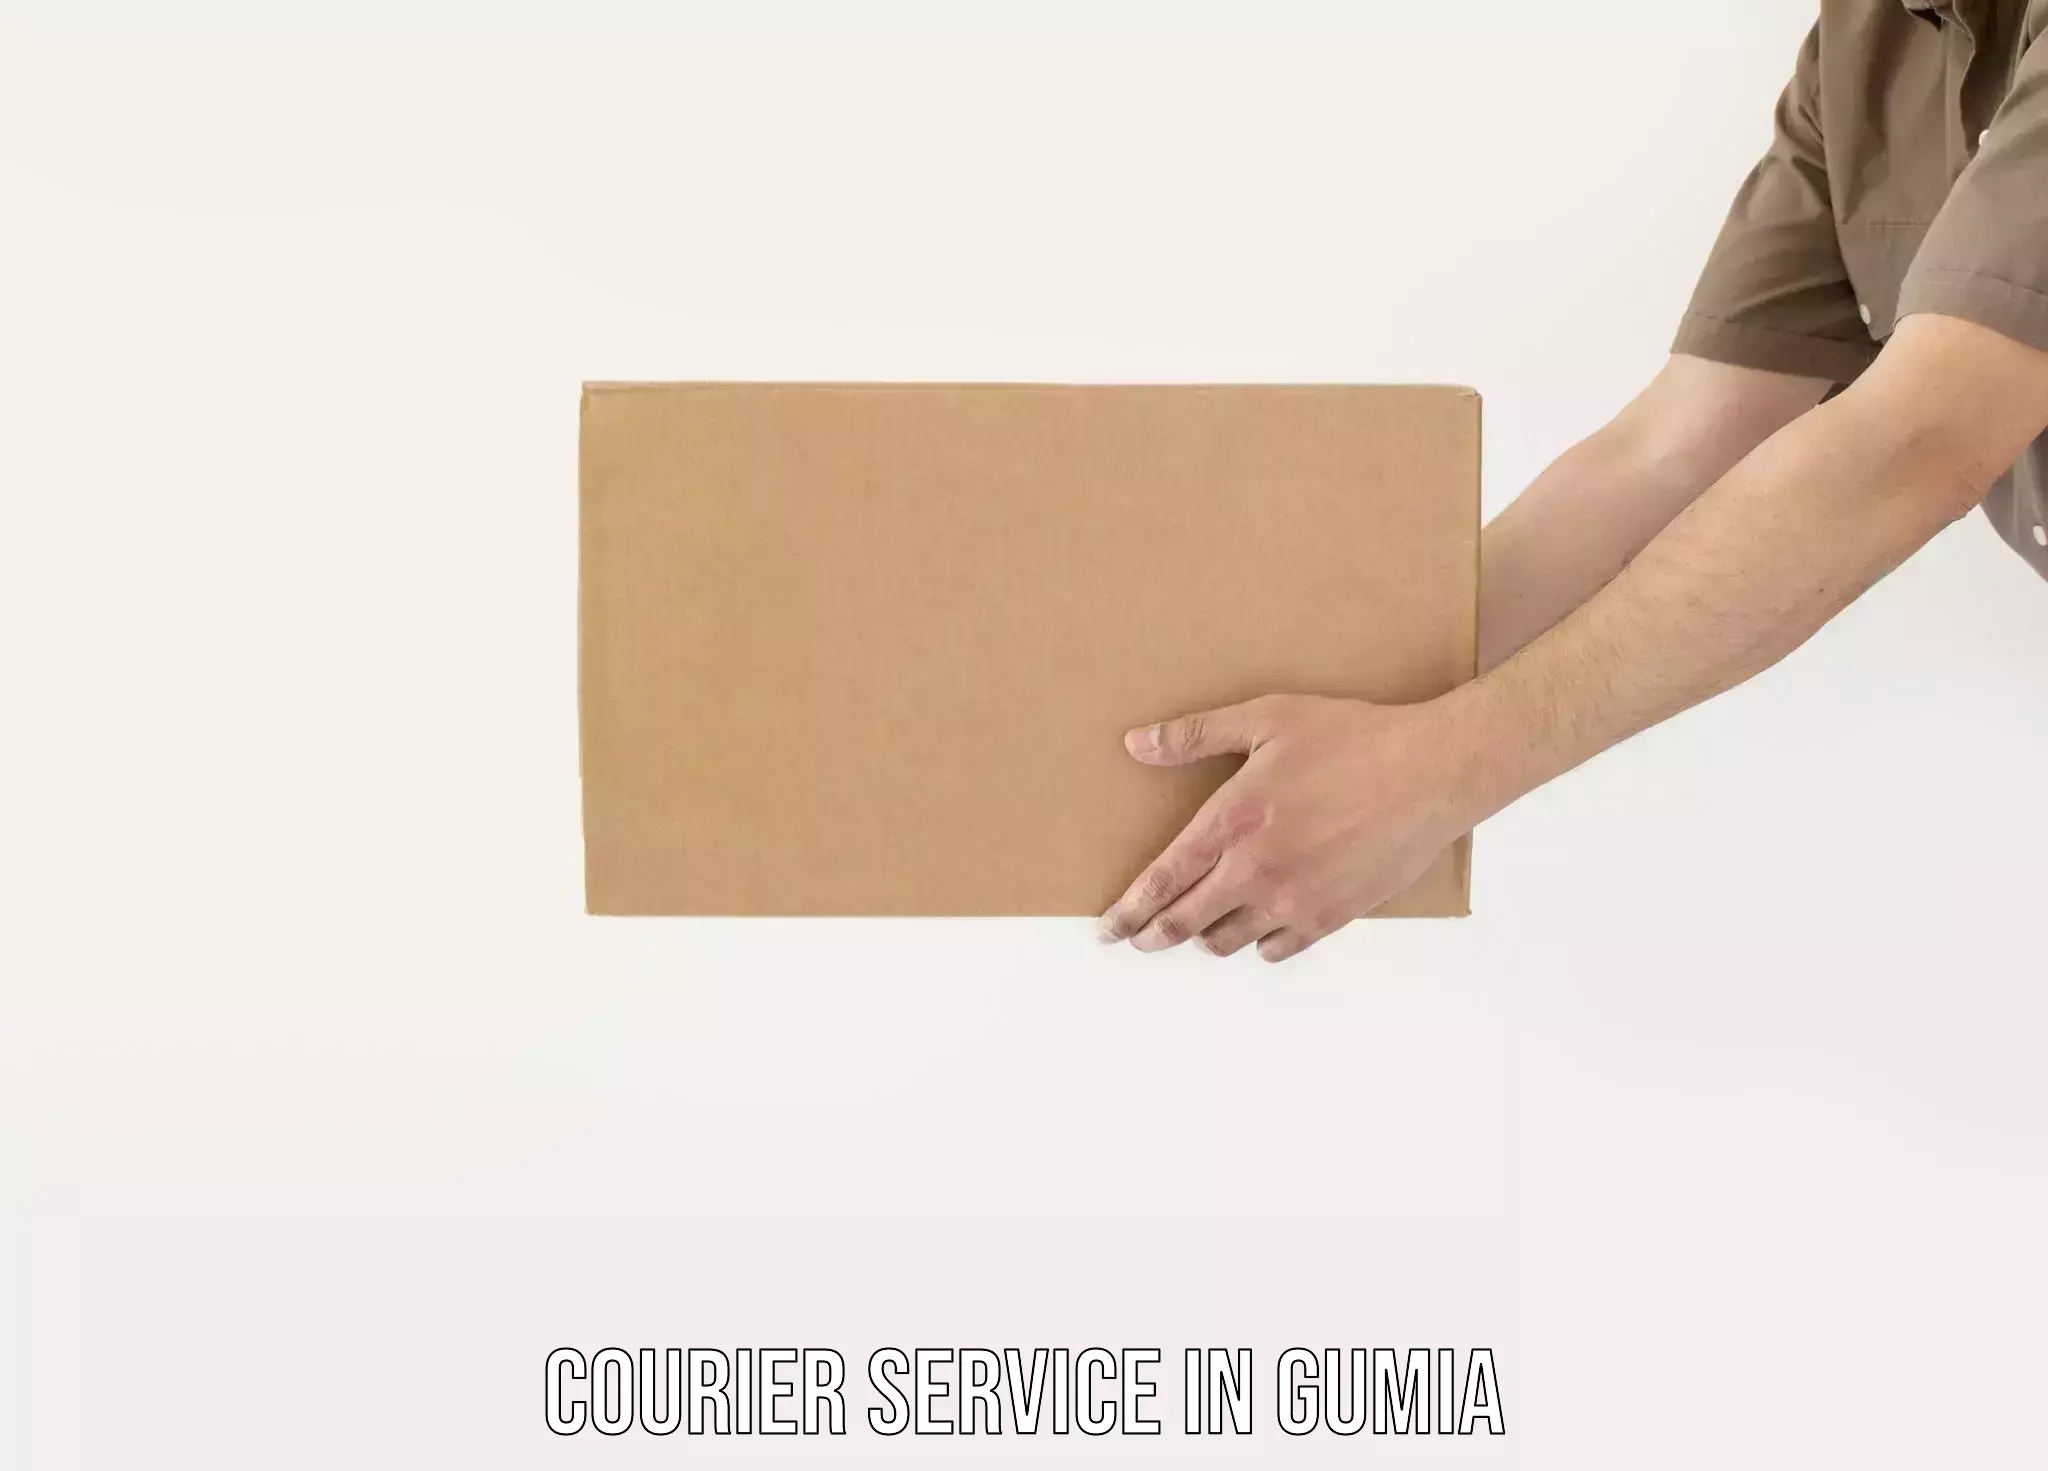 Multi-service courier options in Gumia